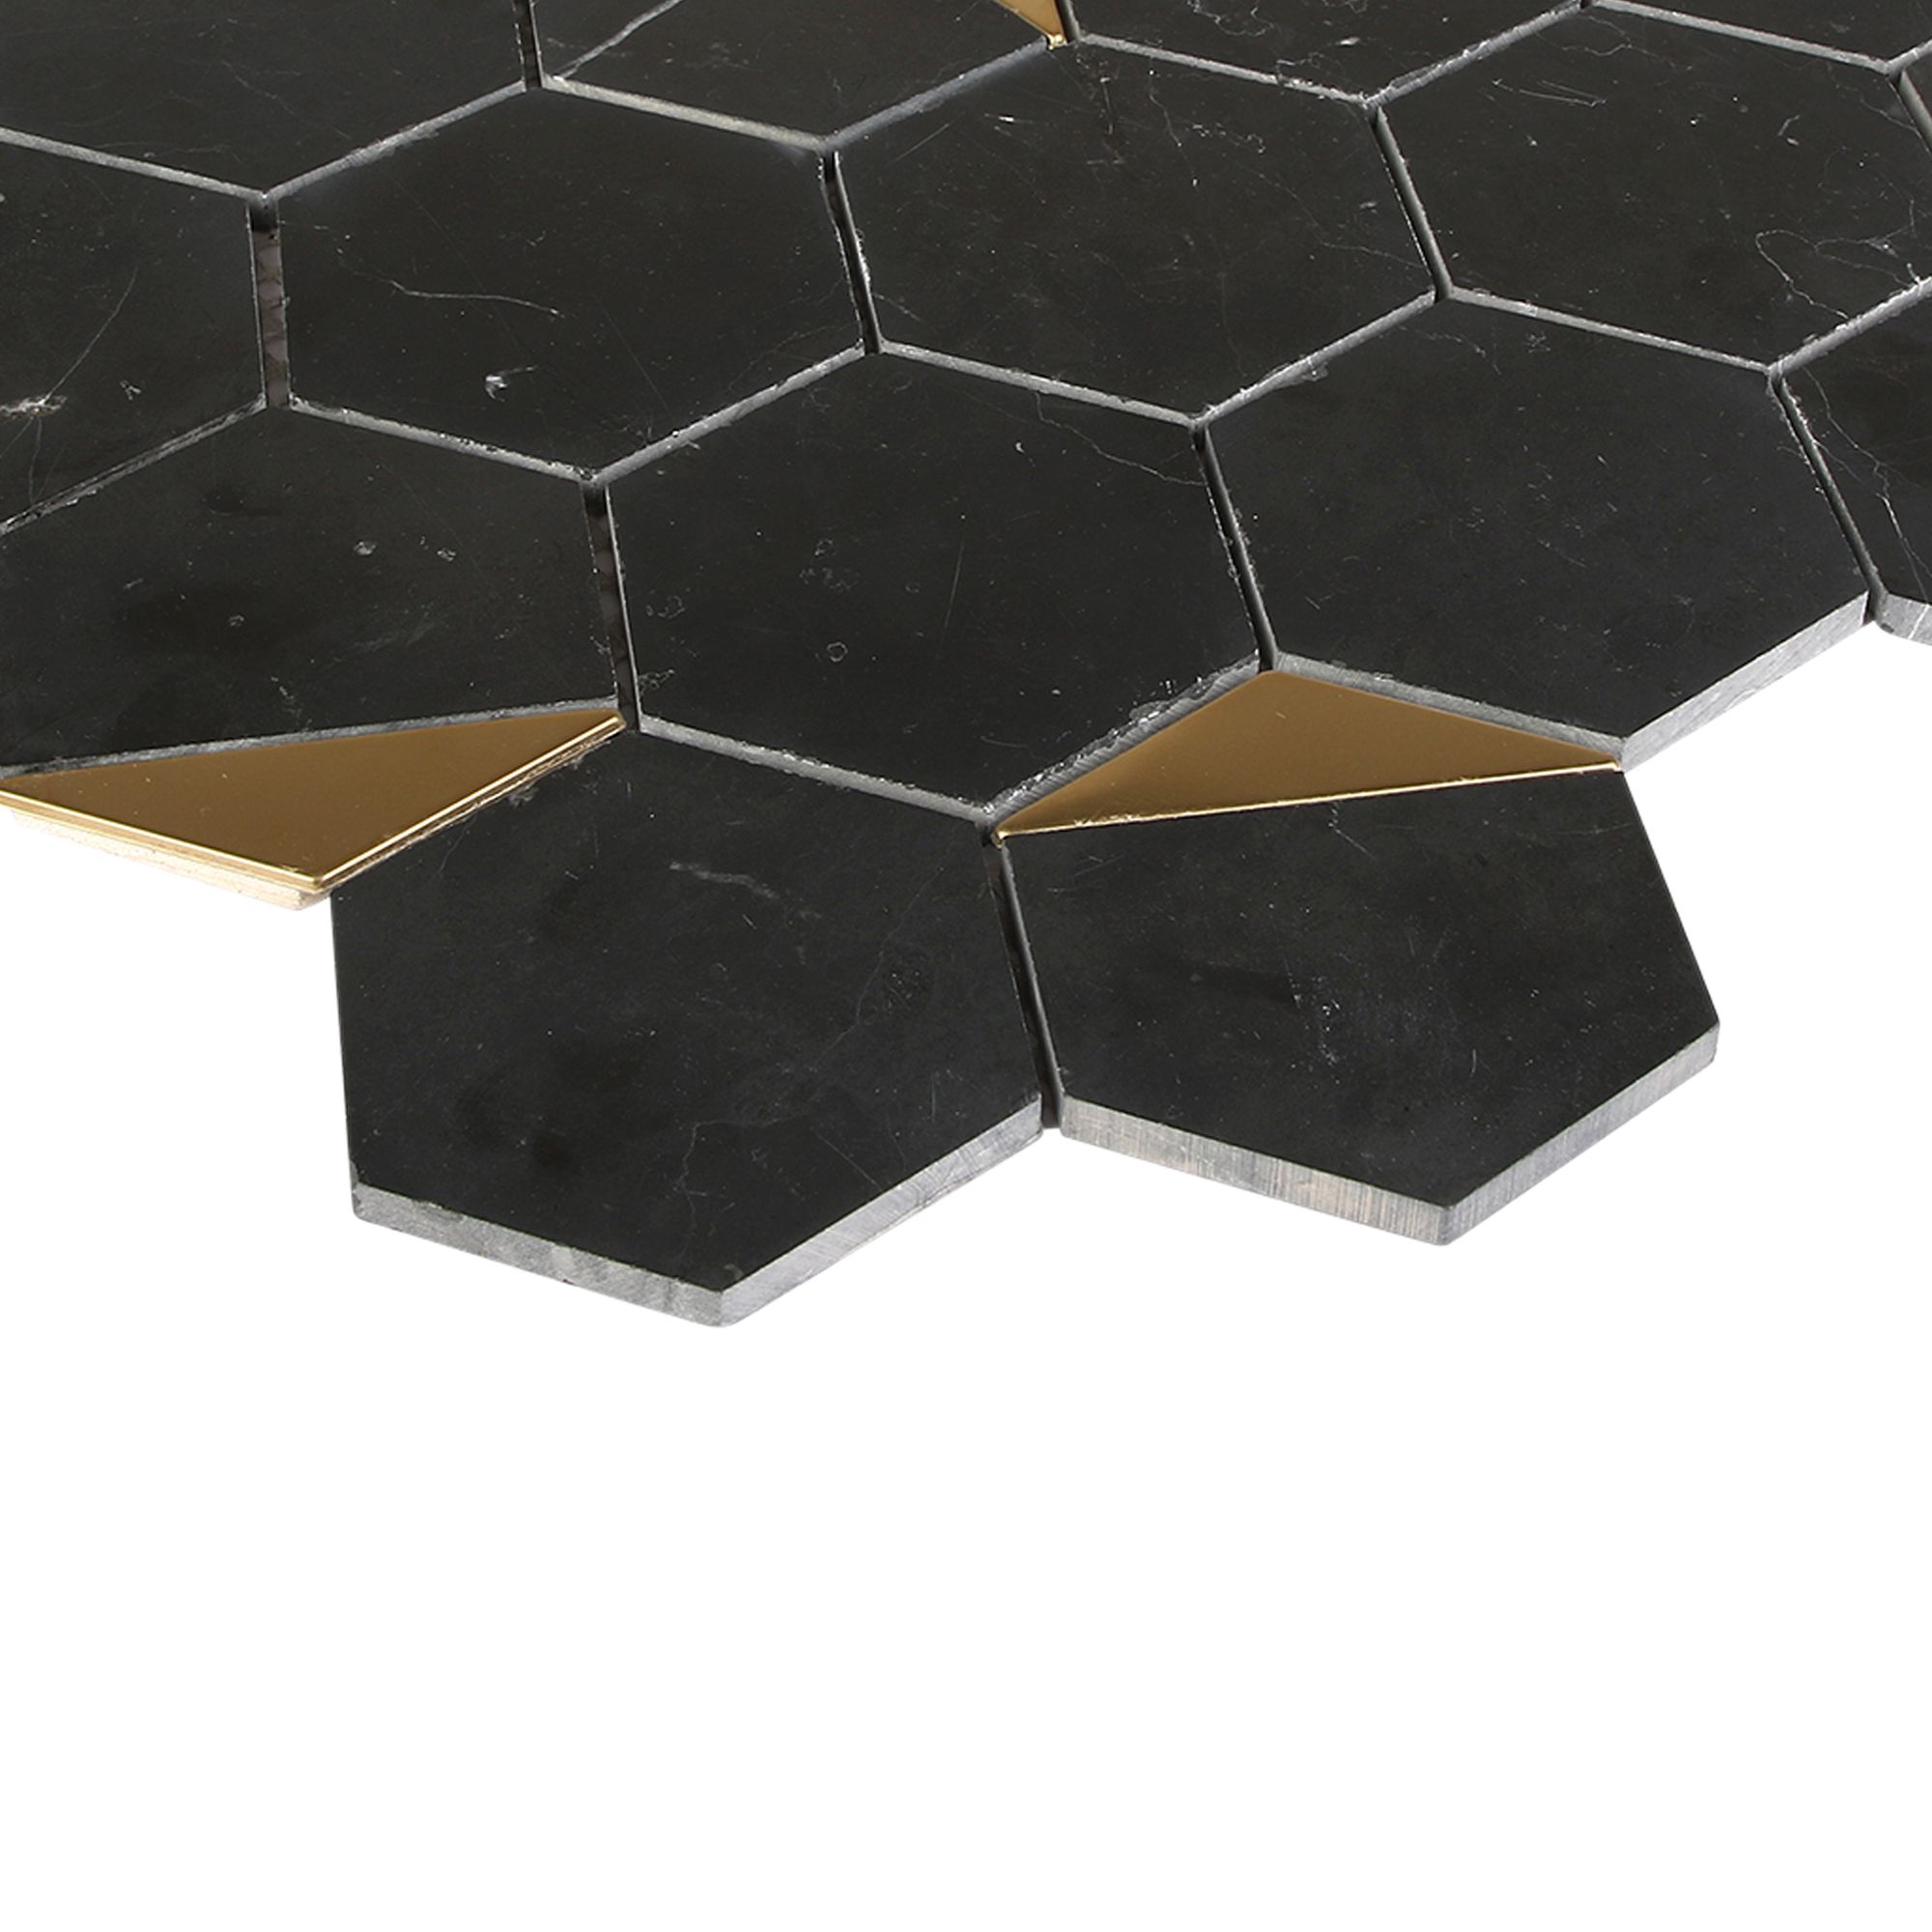 Delicato Black Natural stone & stainless steel Mosaic tile sheet, (L)306mm (W)332mm